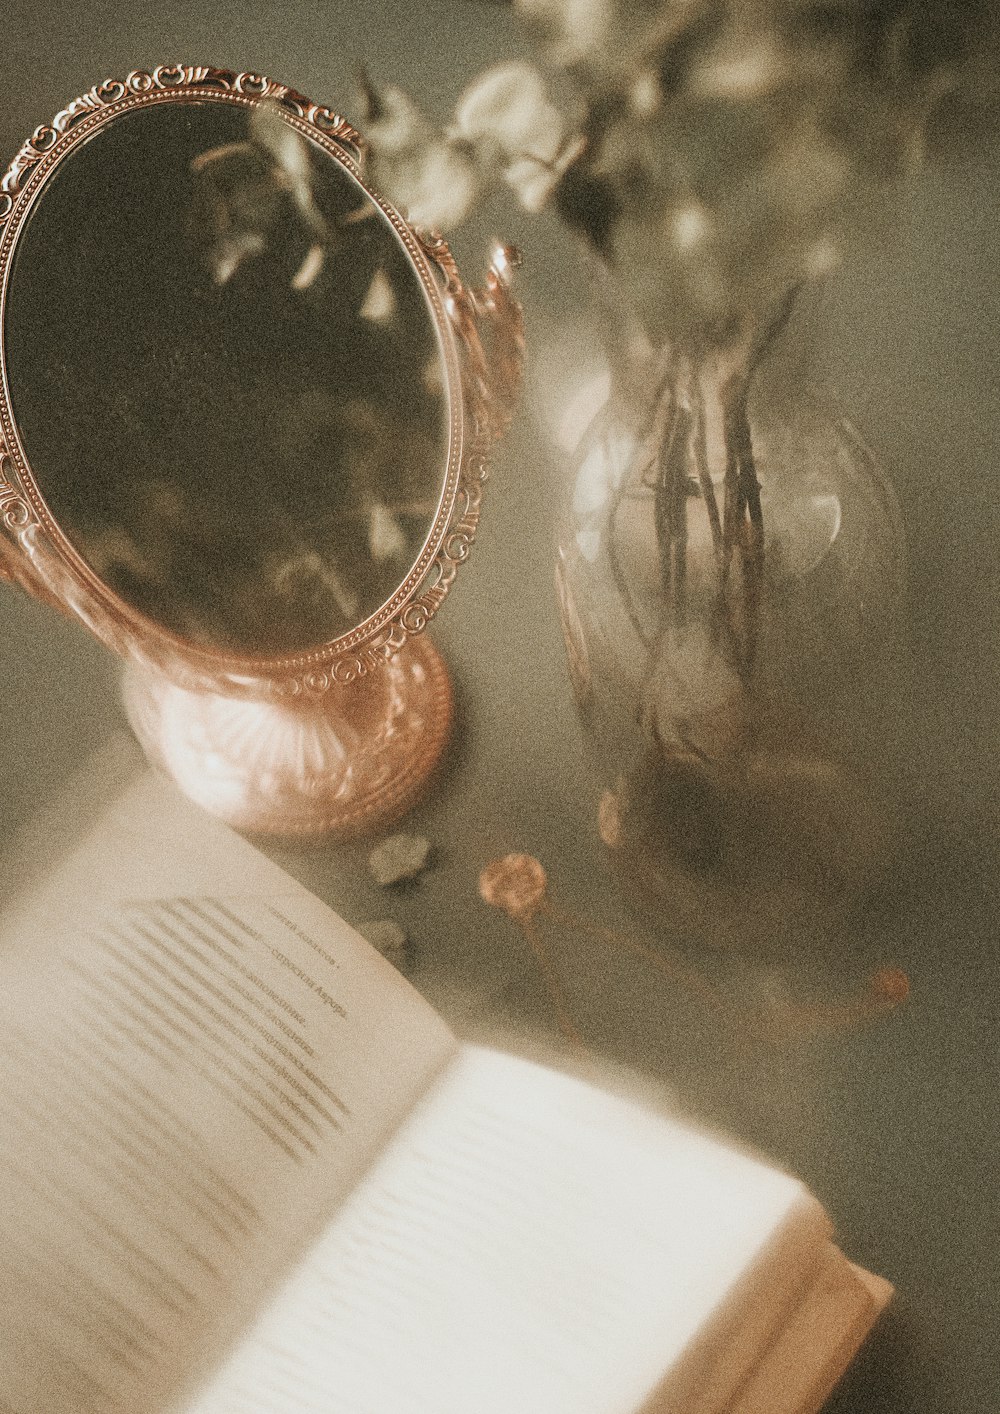 a mirror and a book on a table